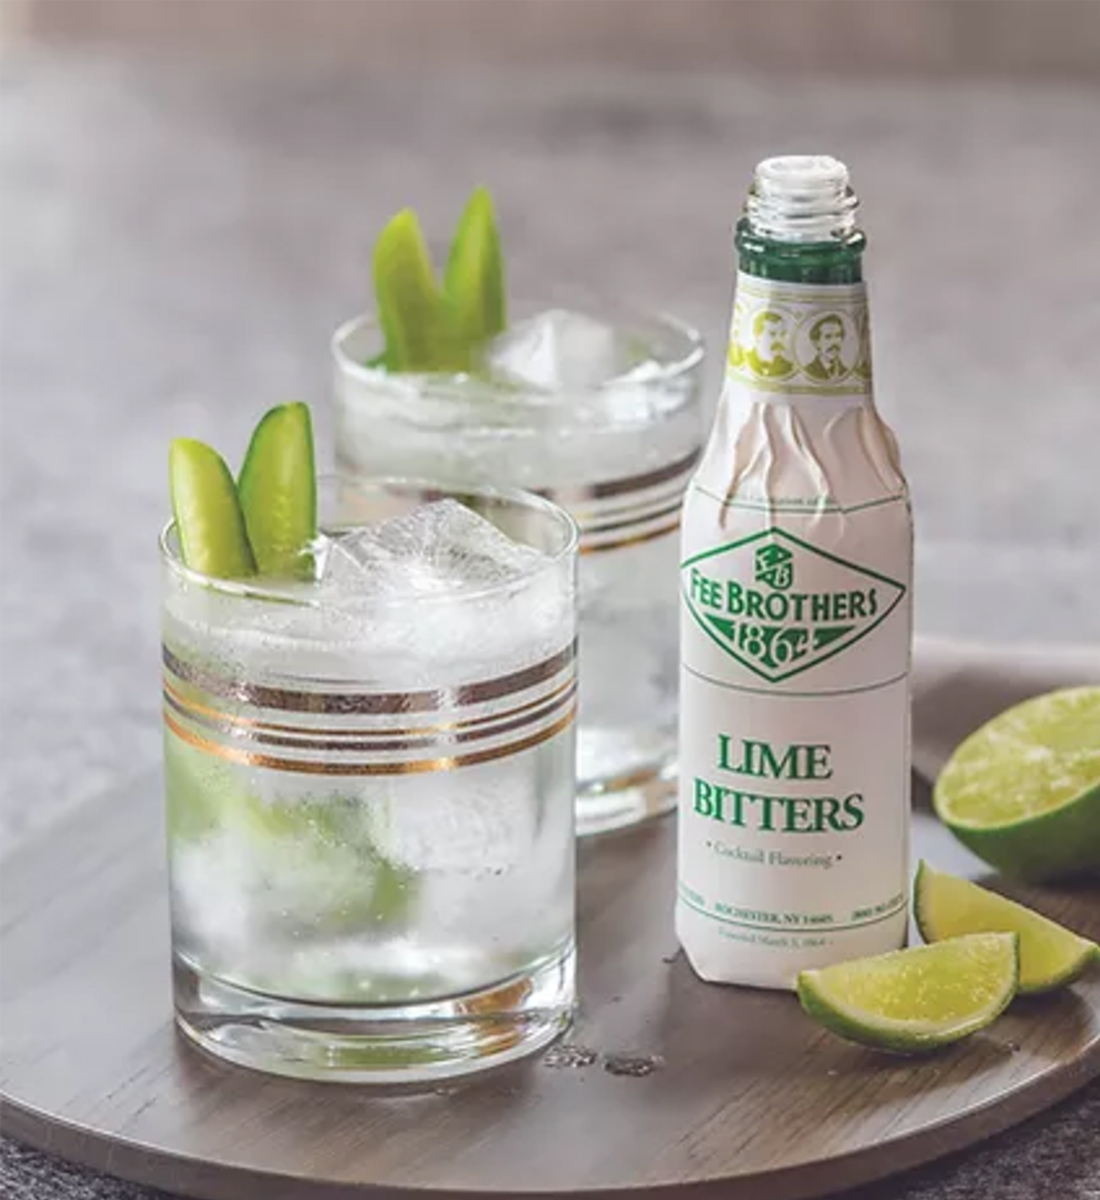 Fee Brothers Lime Bitter 0.15L